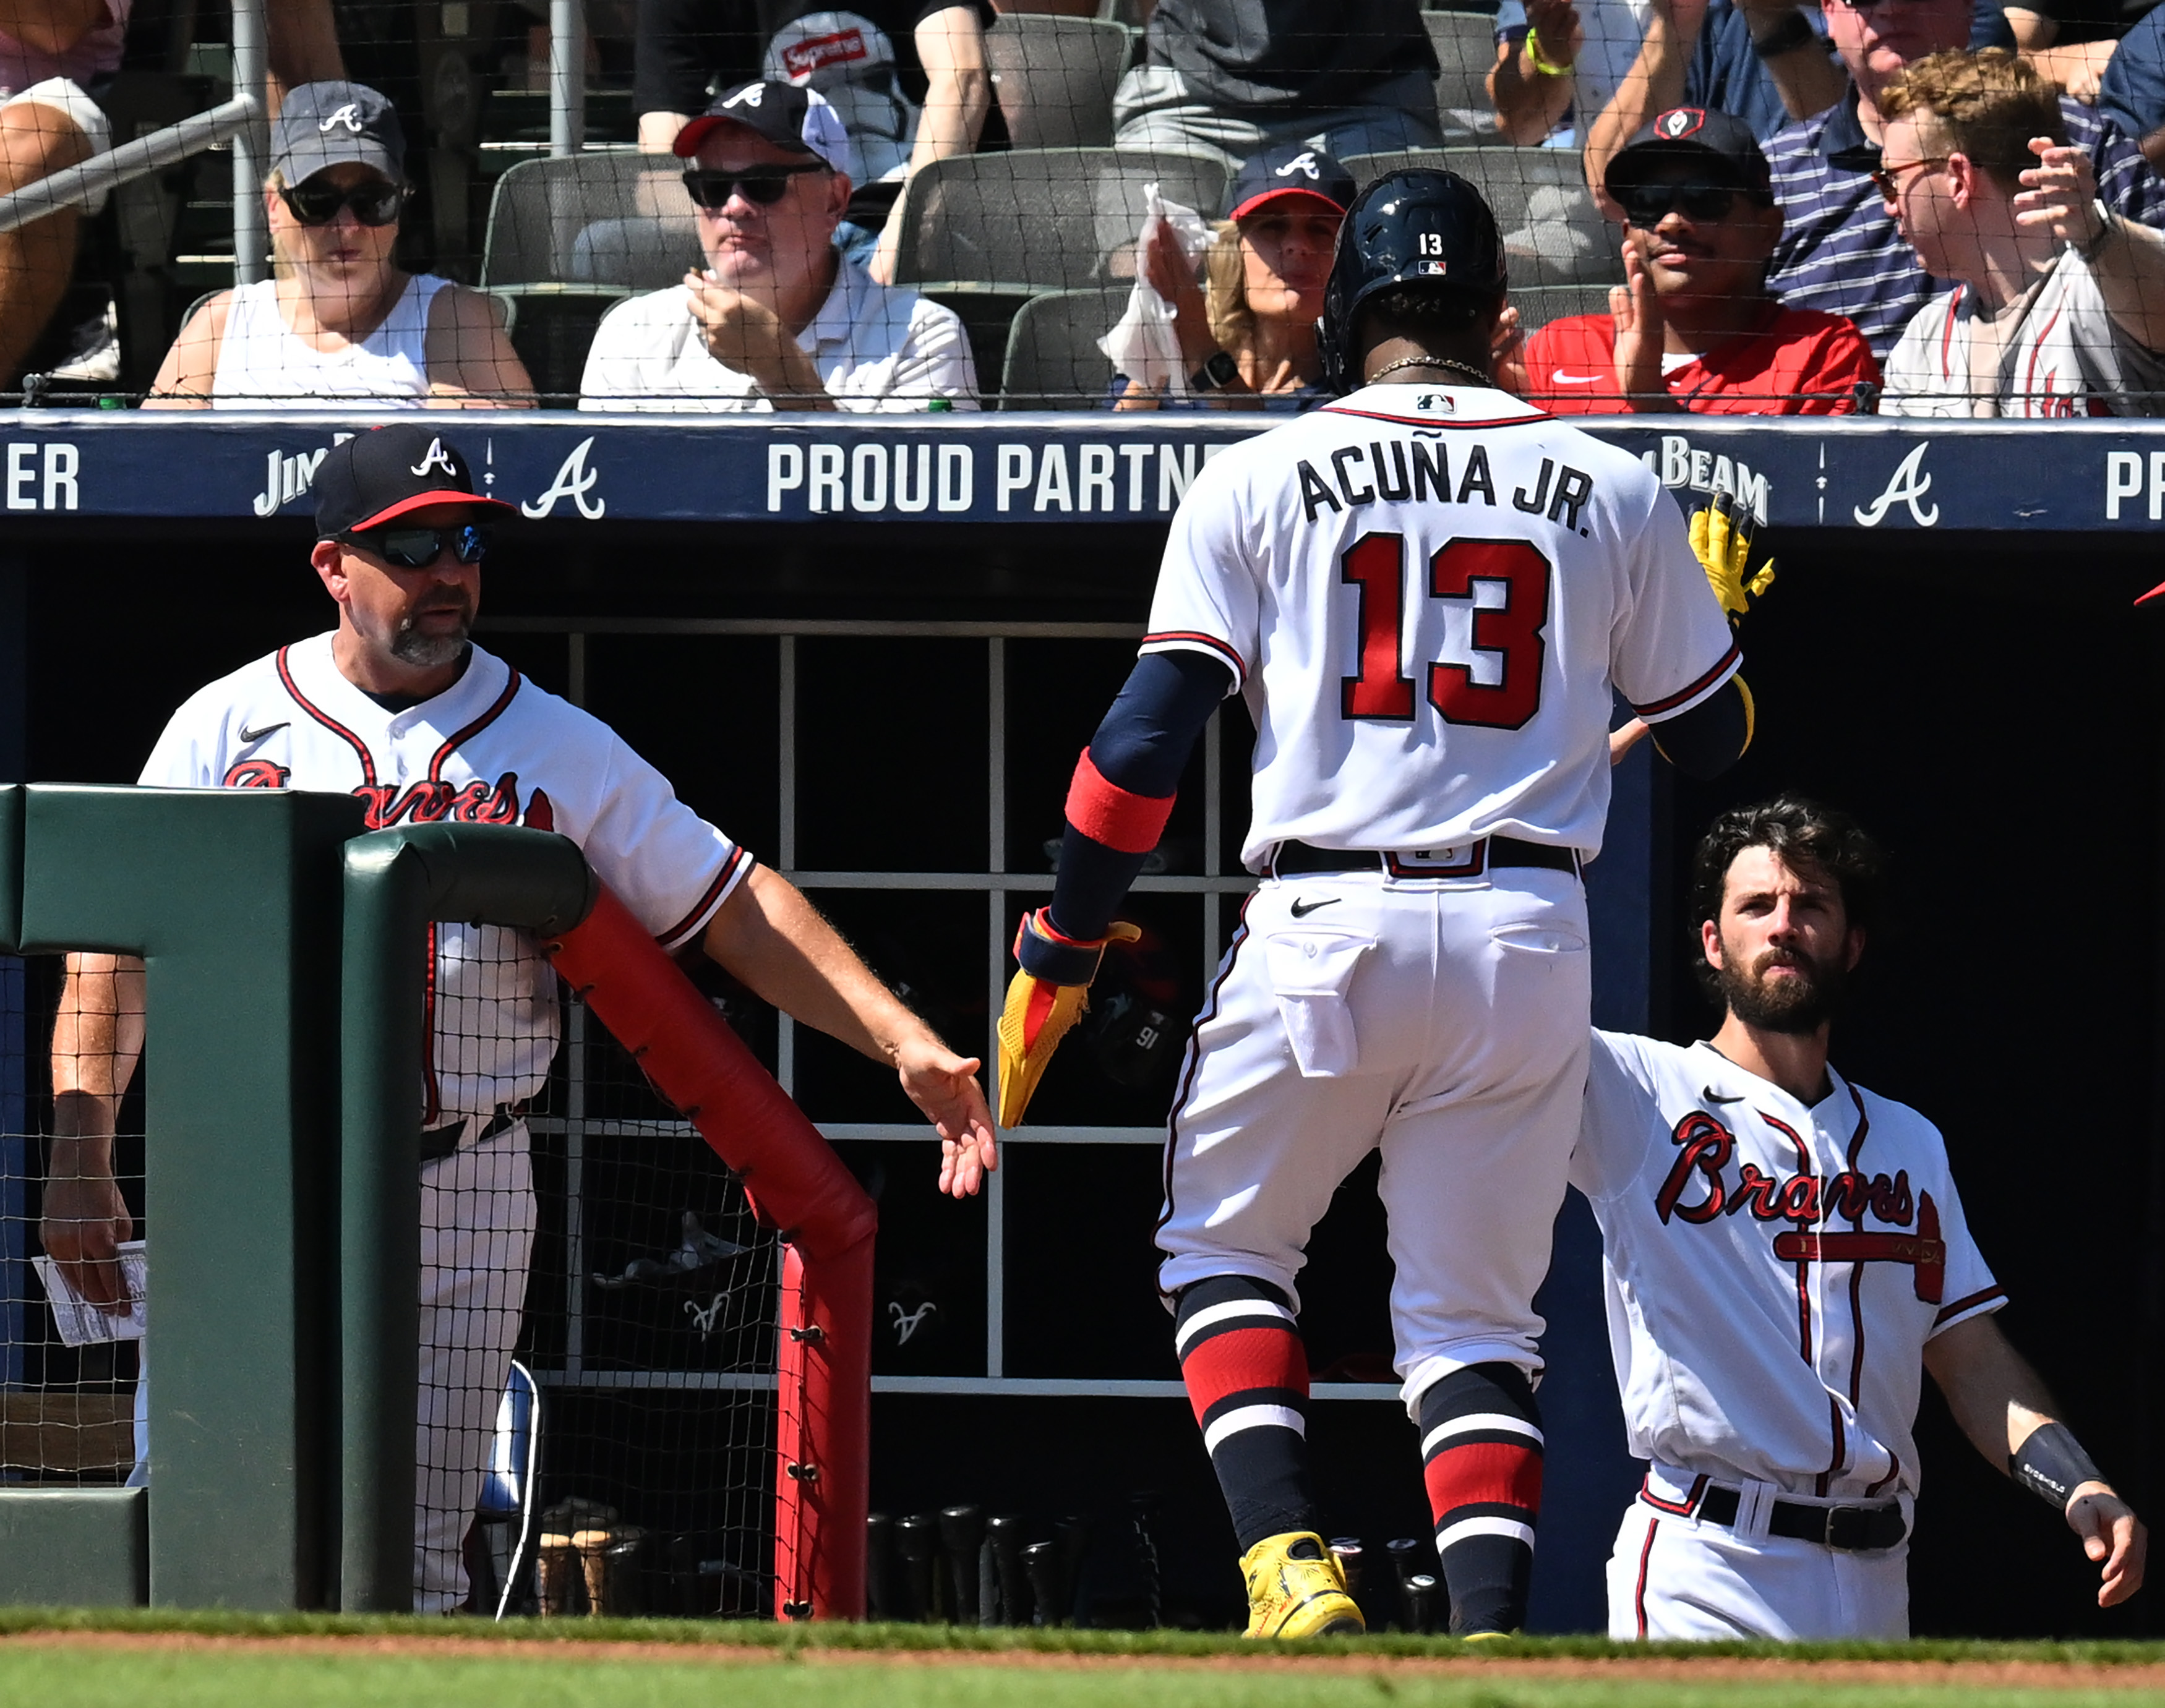 Mark Bradley: The Braves are 3-4. They're fine with that